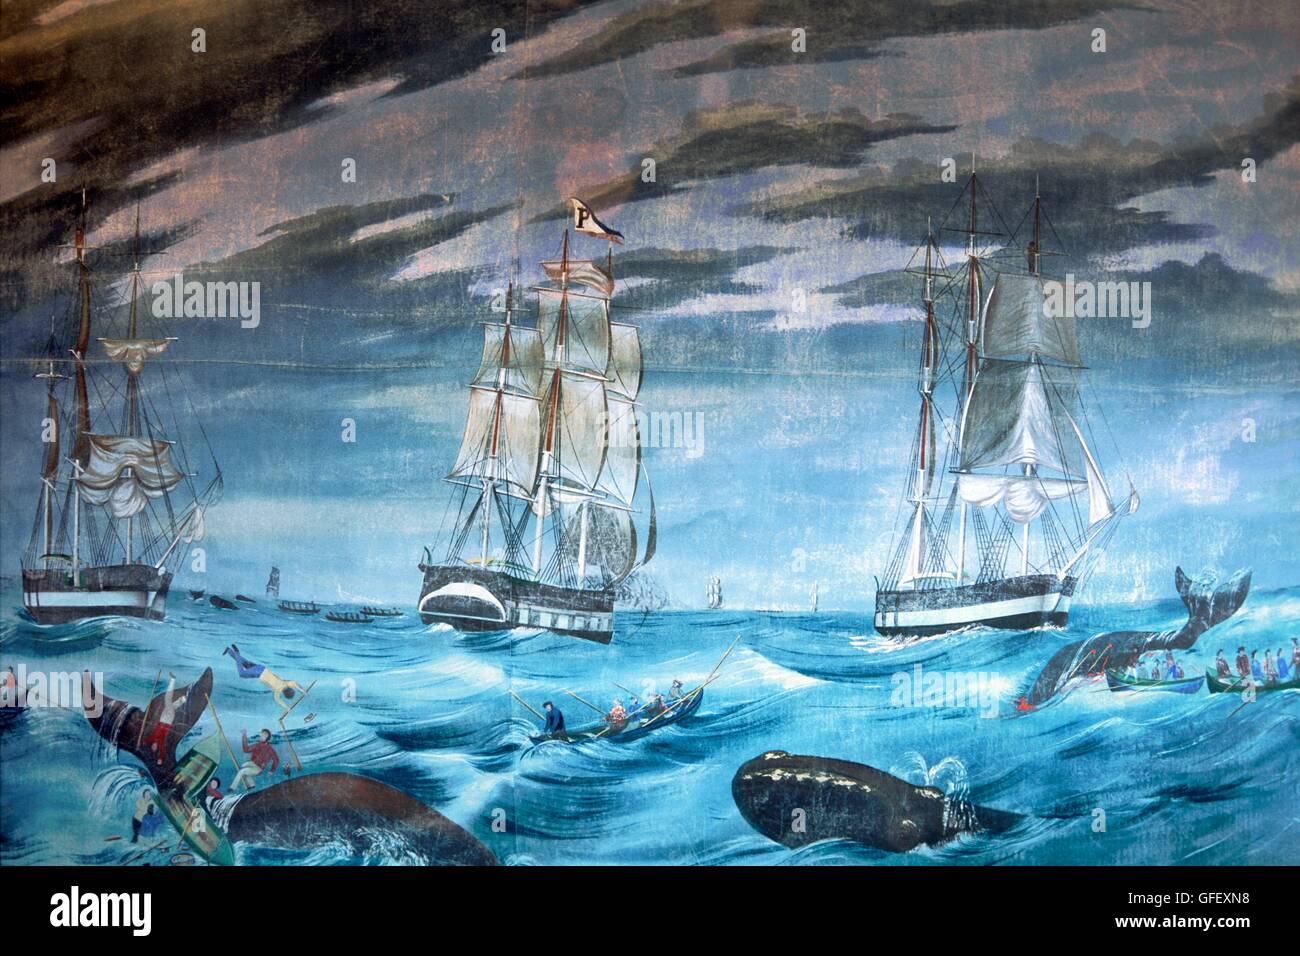 New Bedford Whaling Museum, Massachusetts. Detail of large painted 19C. diorama showing whale hunting harpooning scenes Stock Photo